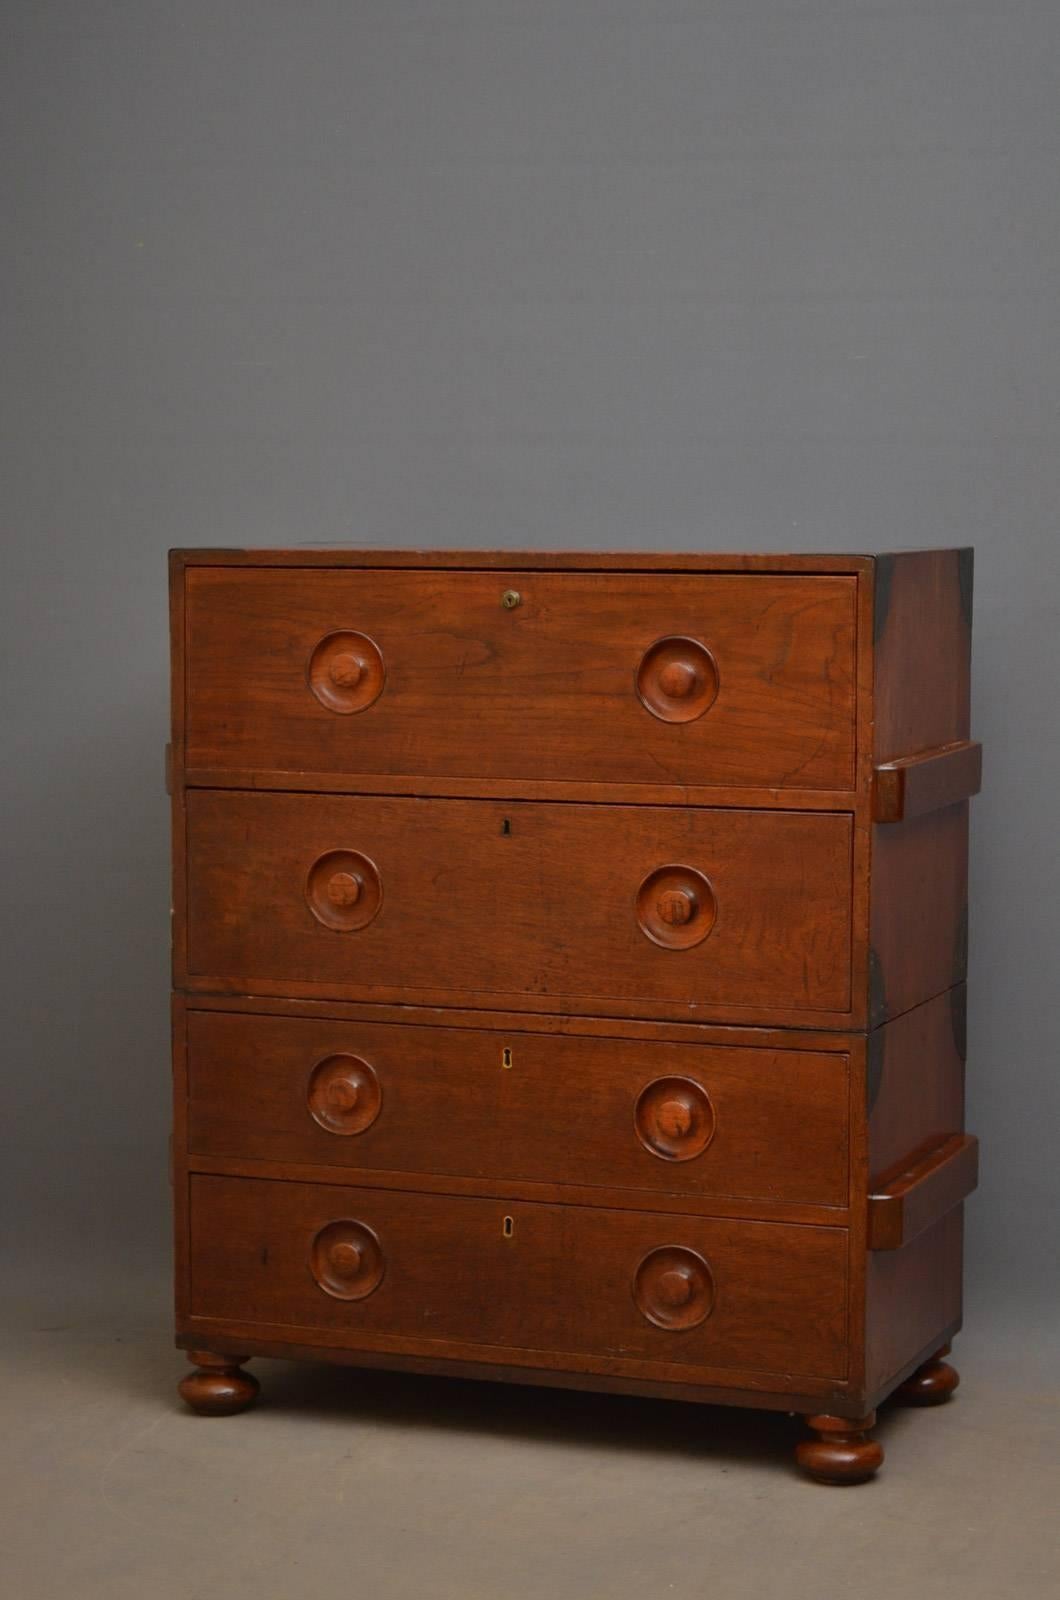 Sn4304 early 19th century teak secretaire Campaign chest of drawers, having metal bounds and four graduated drawers, one being a secretaire, all fitted with original turned and recessed handles and carrying handles to sides, standing on turned feet.